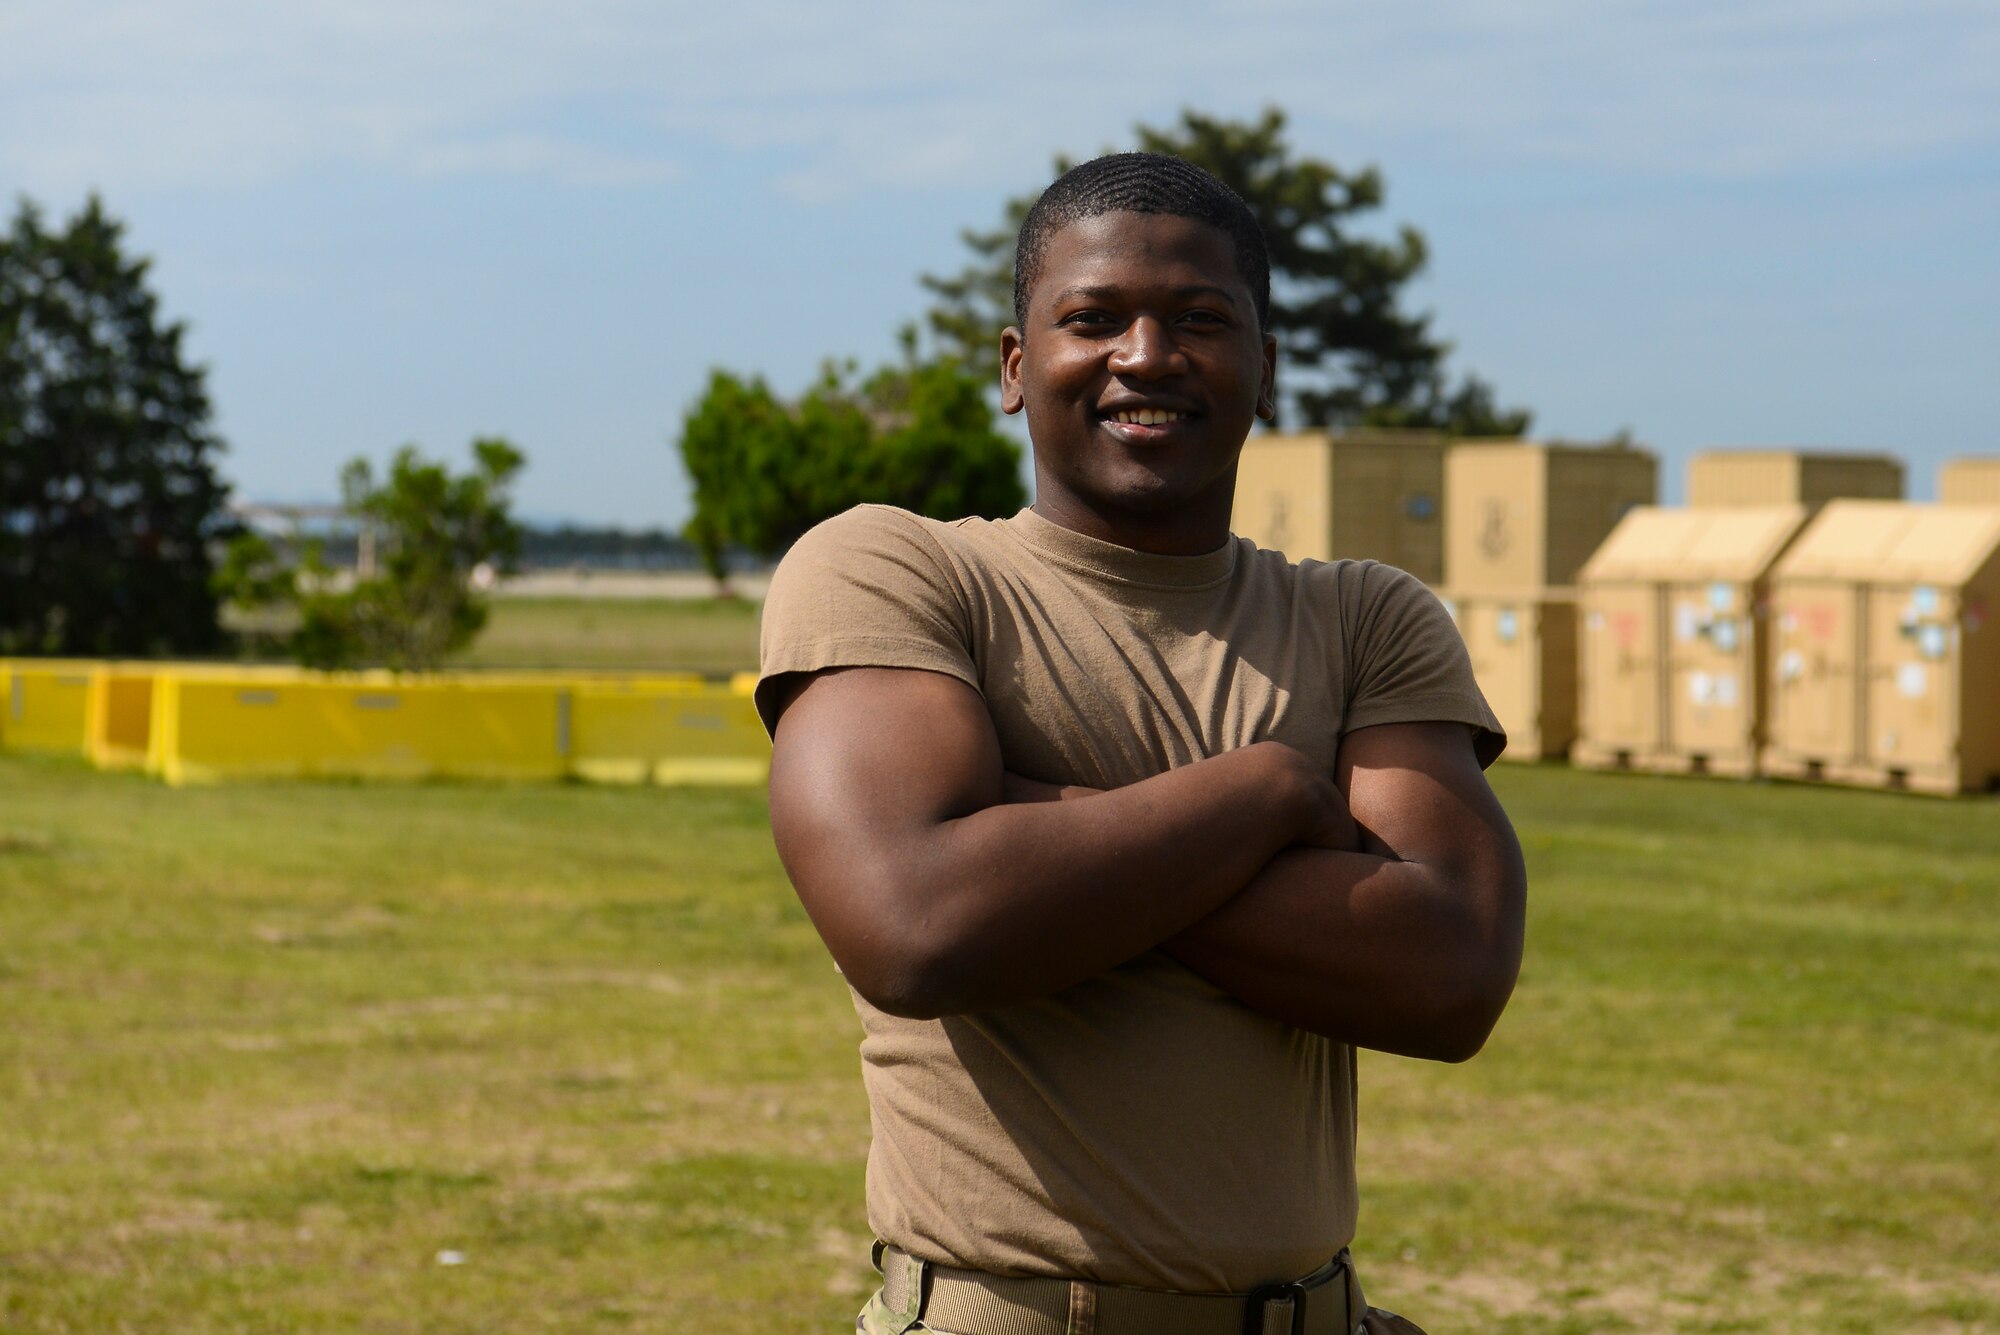 An Airman poses for a photo.